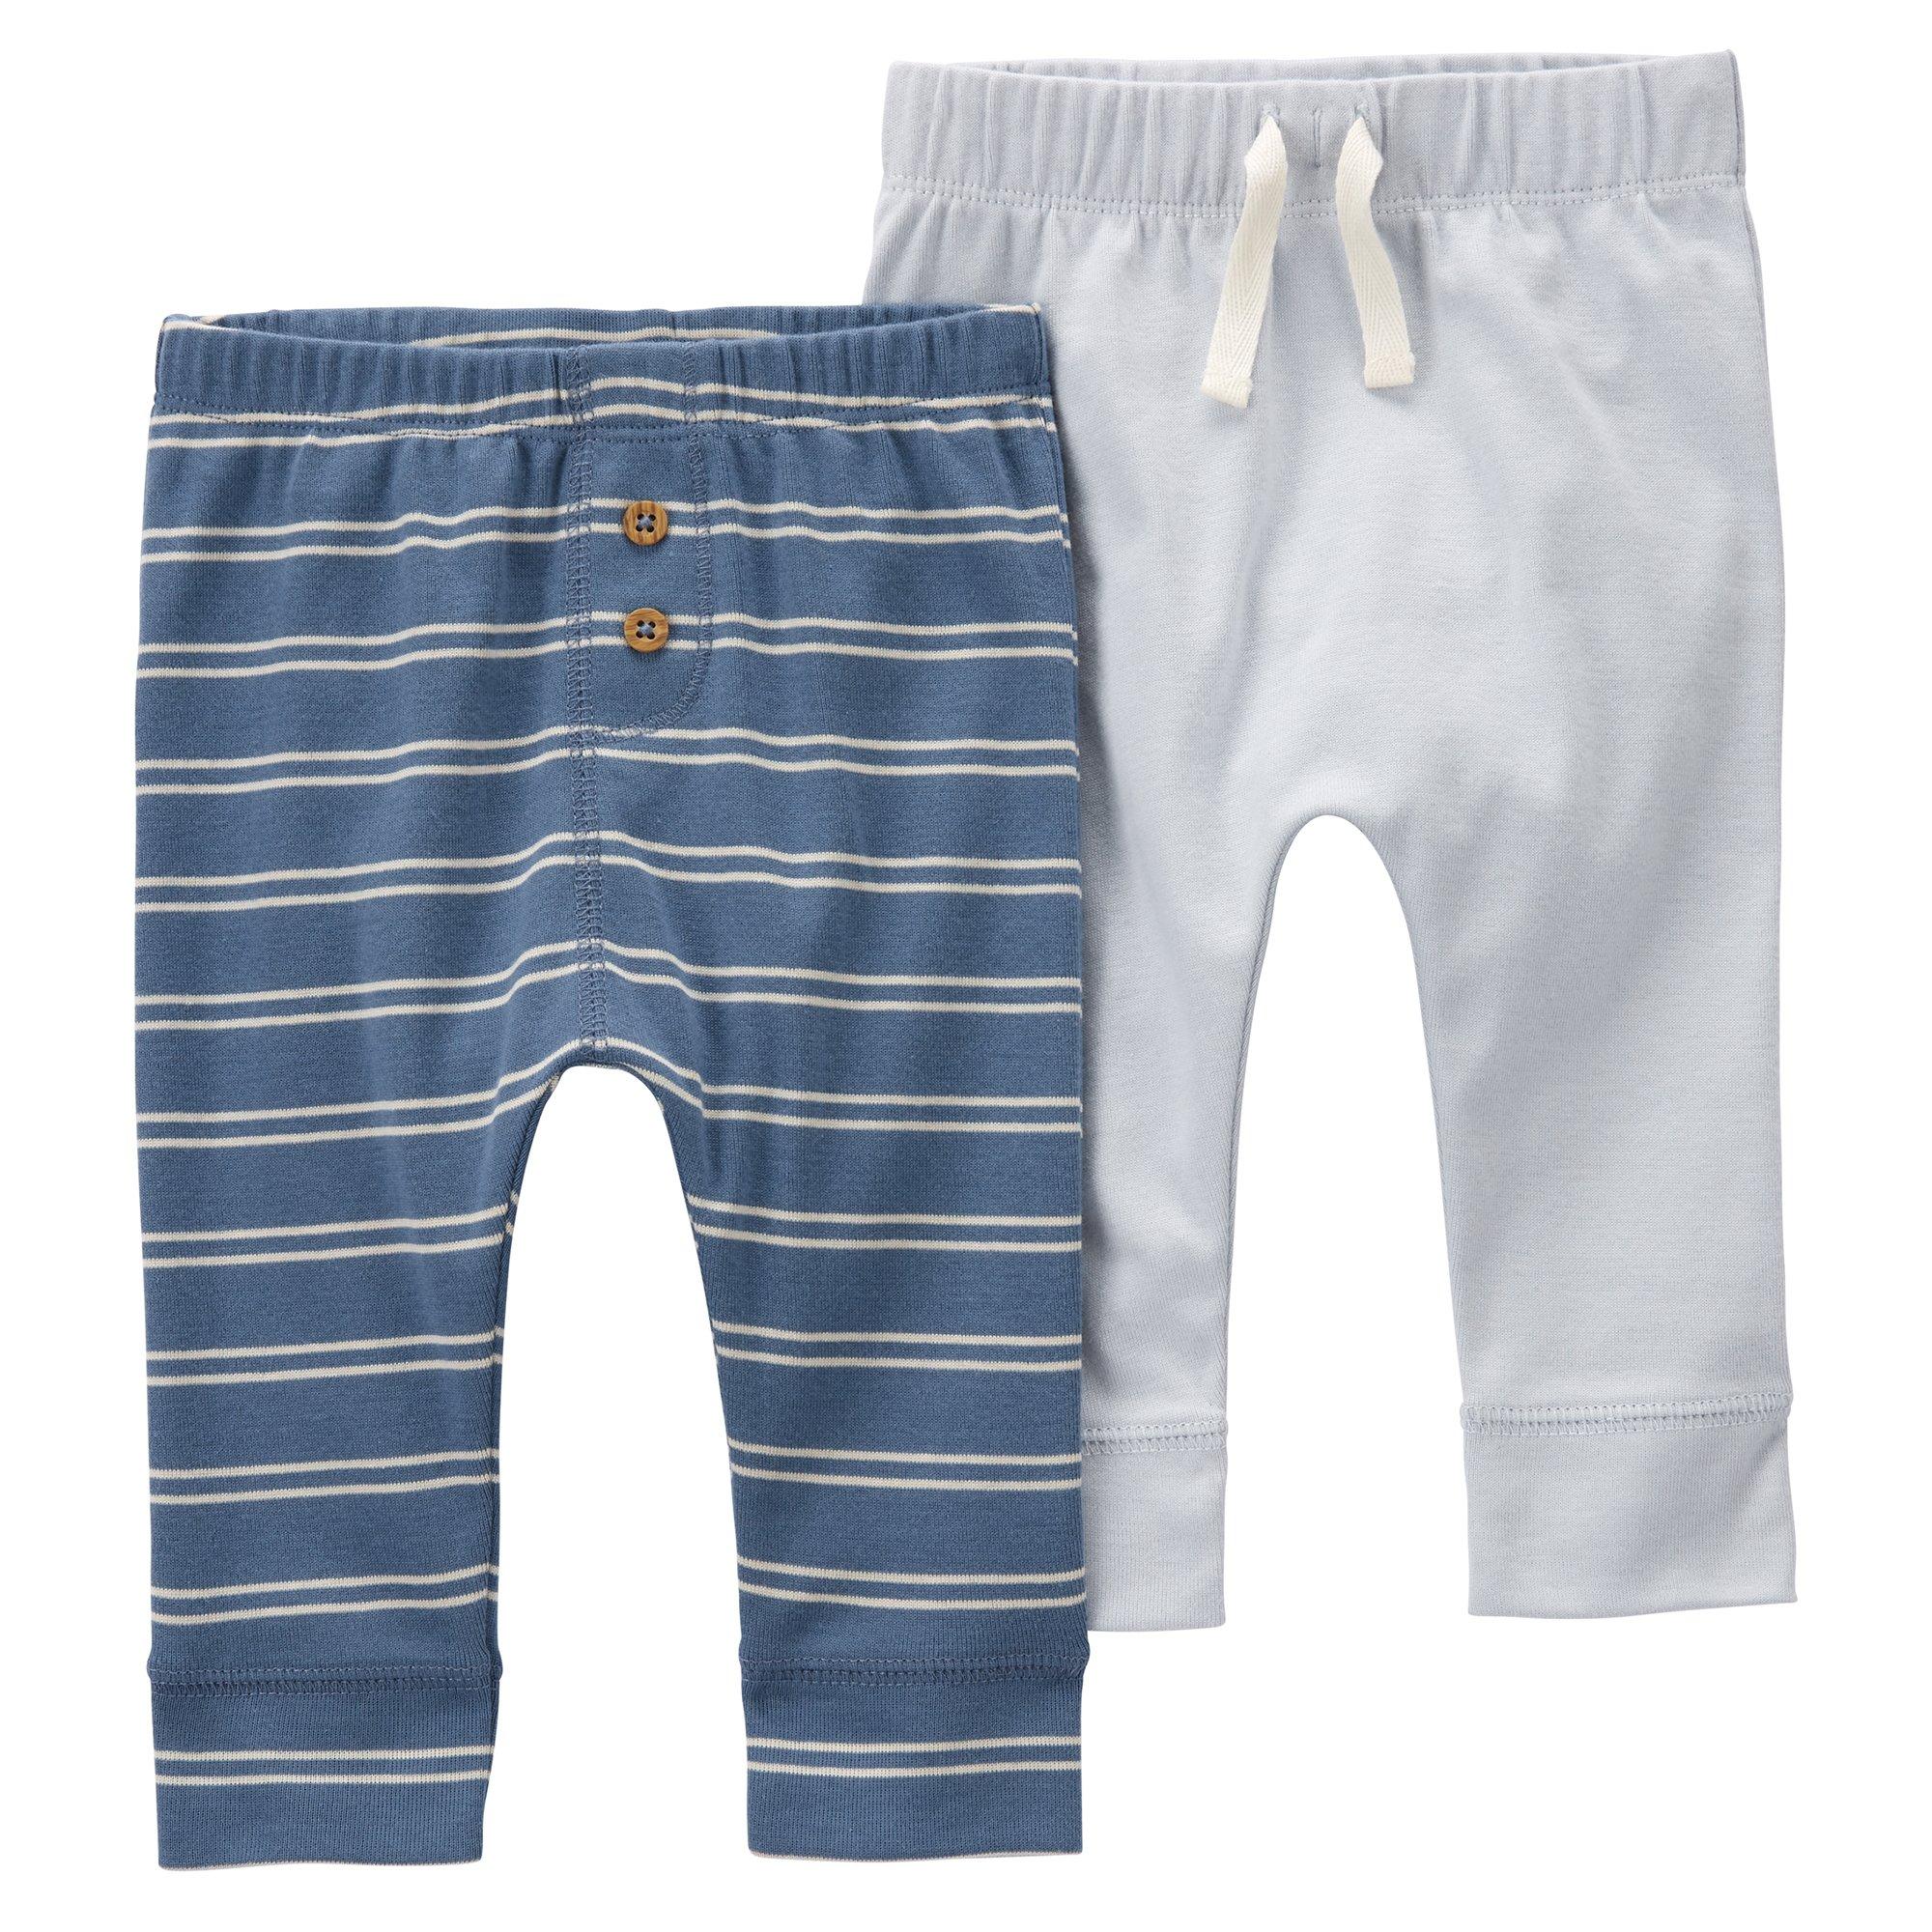 Carters Baby Boys 2-pk. Solid & Stripe Jogger